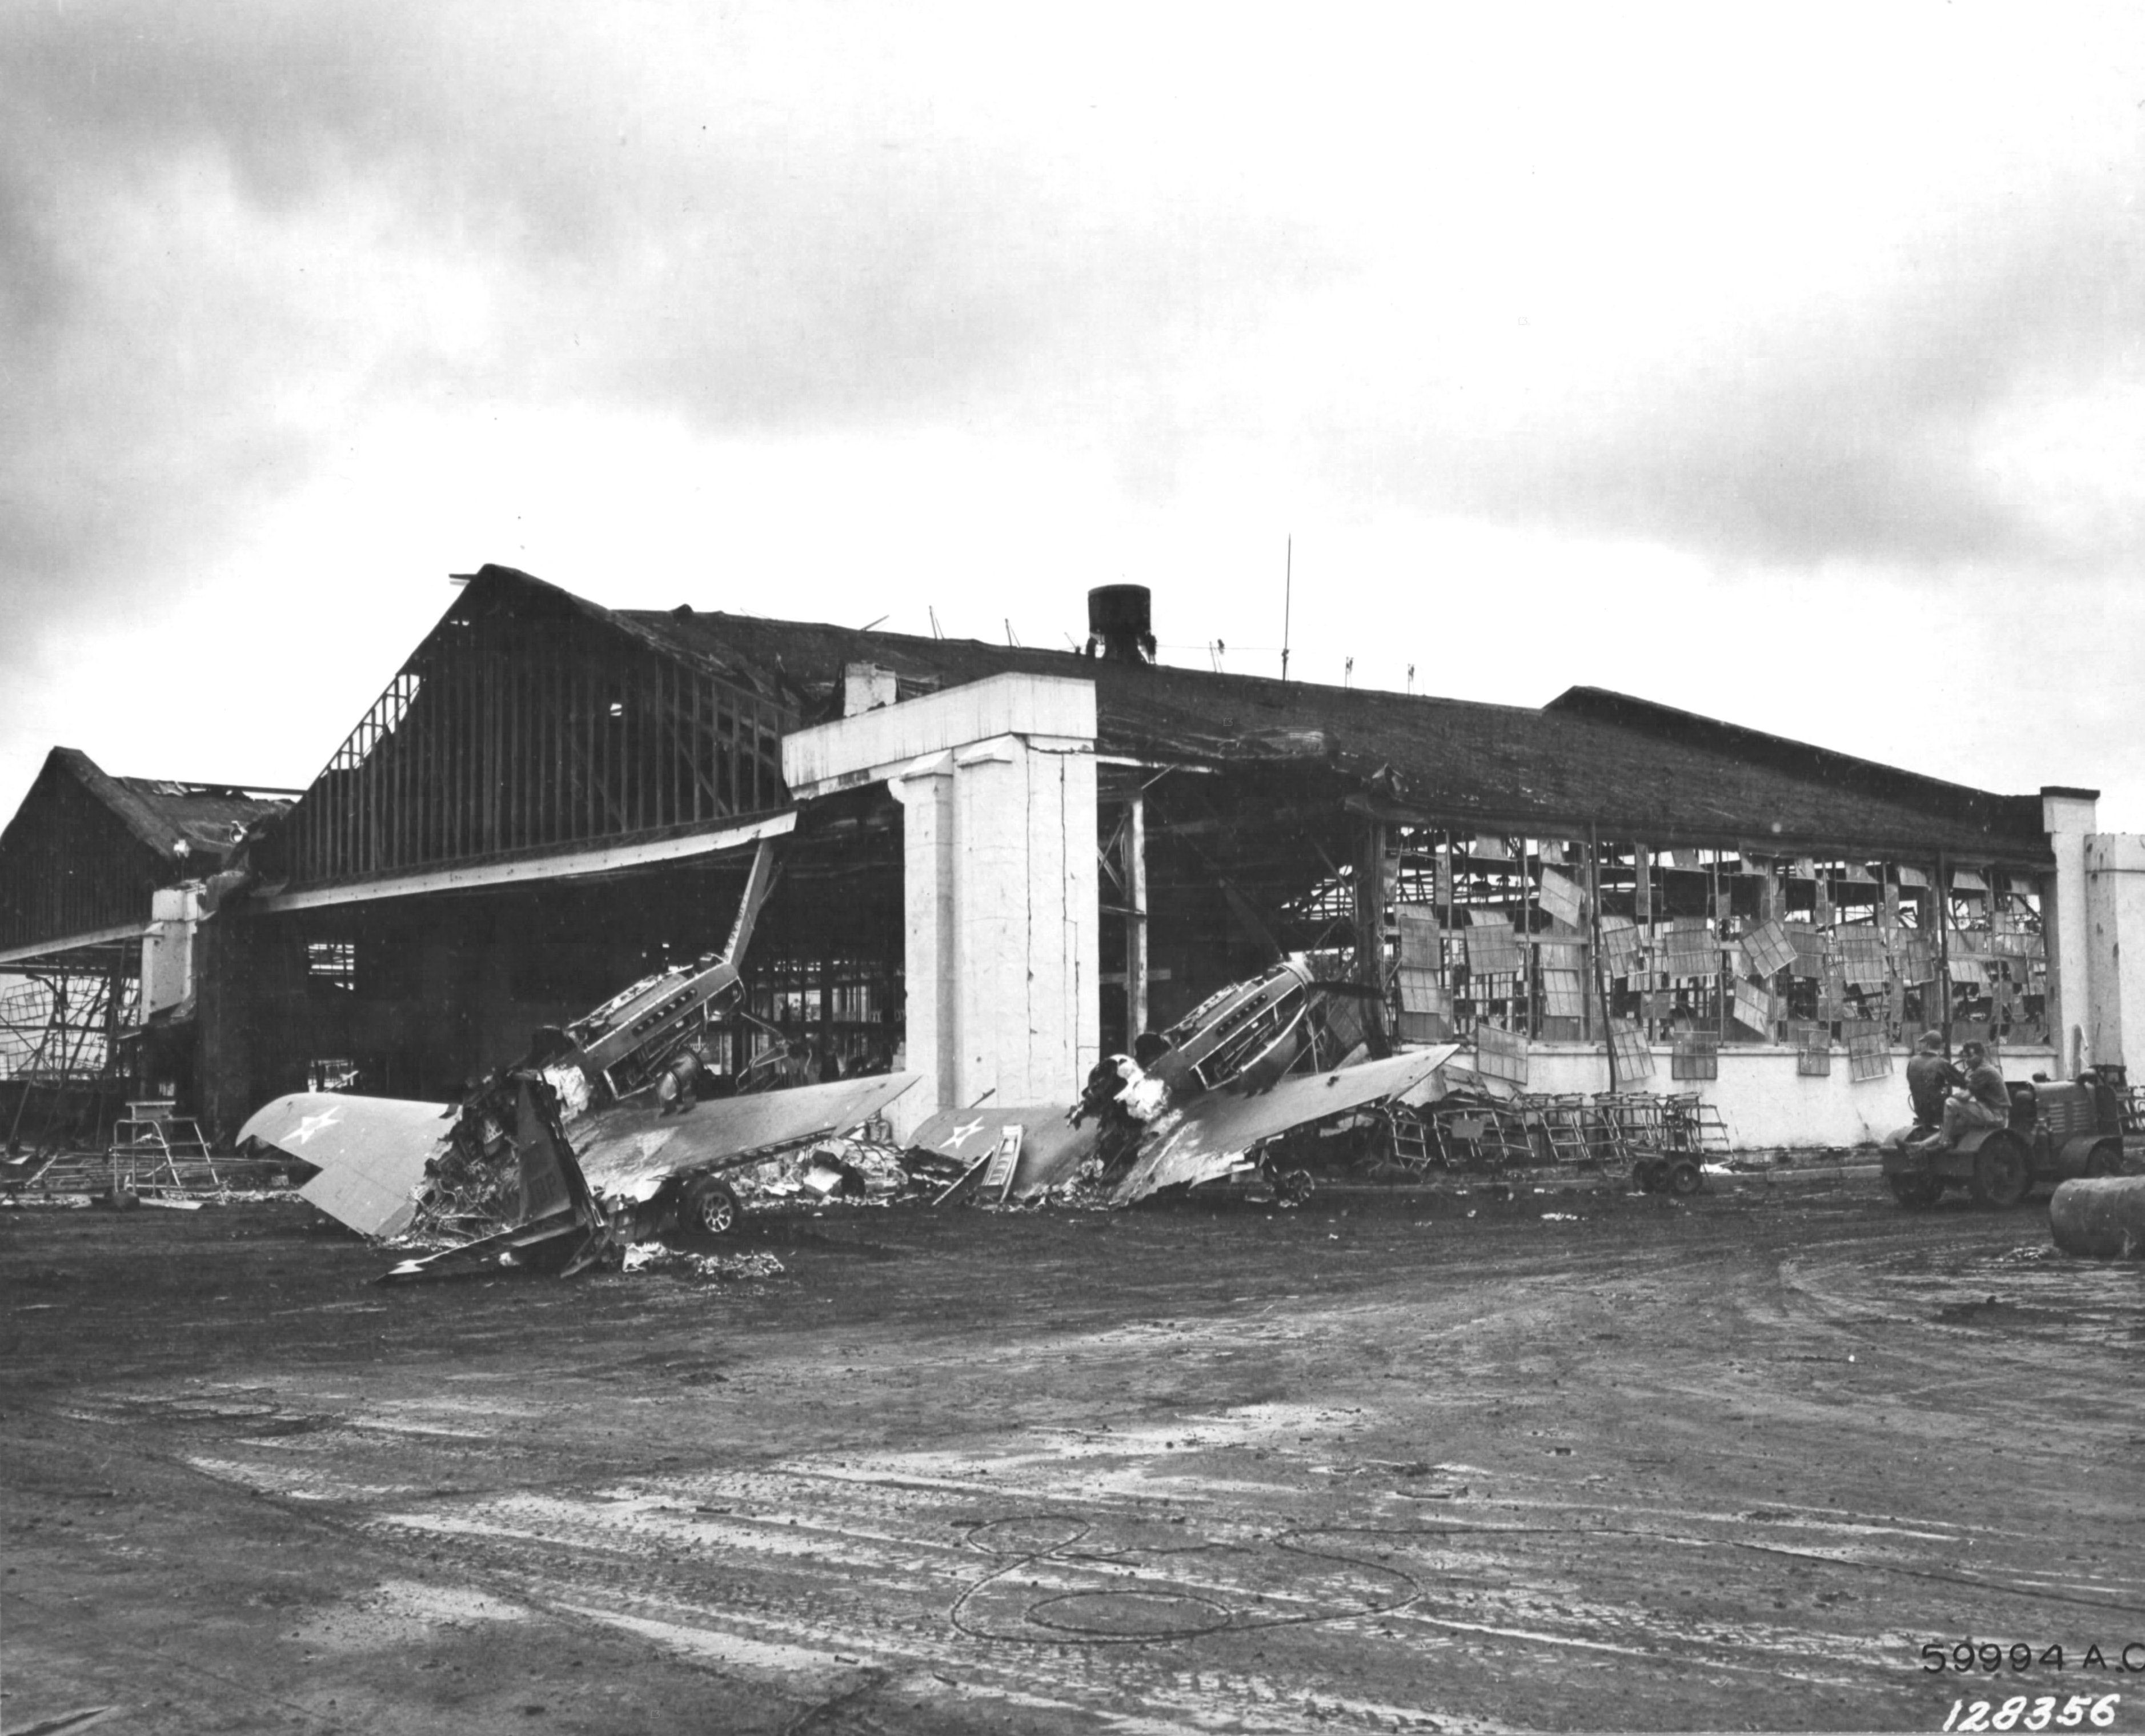 Wrecked P-40 fighters in front of the damaged Hangar #3 at Wheeler Field, Oahu, Hawaii following the Japanese Pearl Harbor attack. 11 Dec 1941 photo.